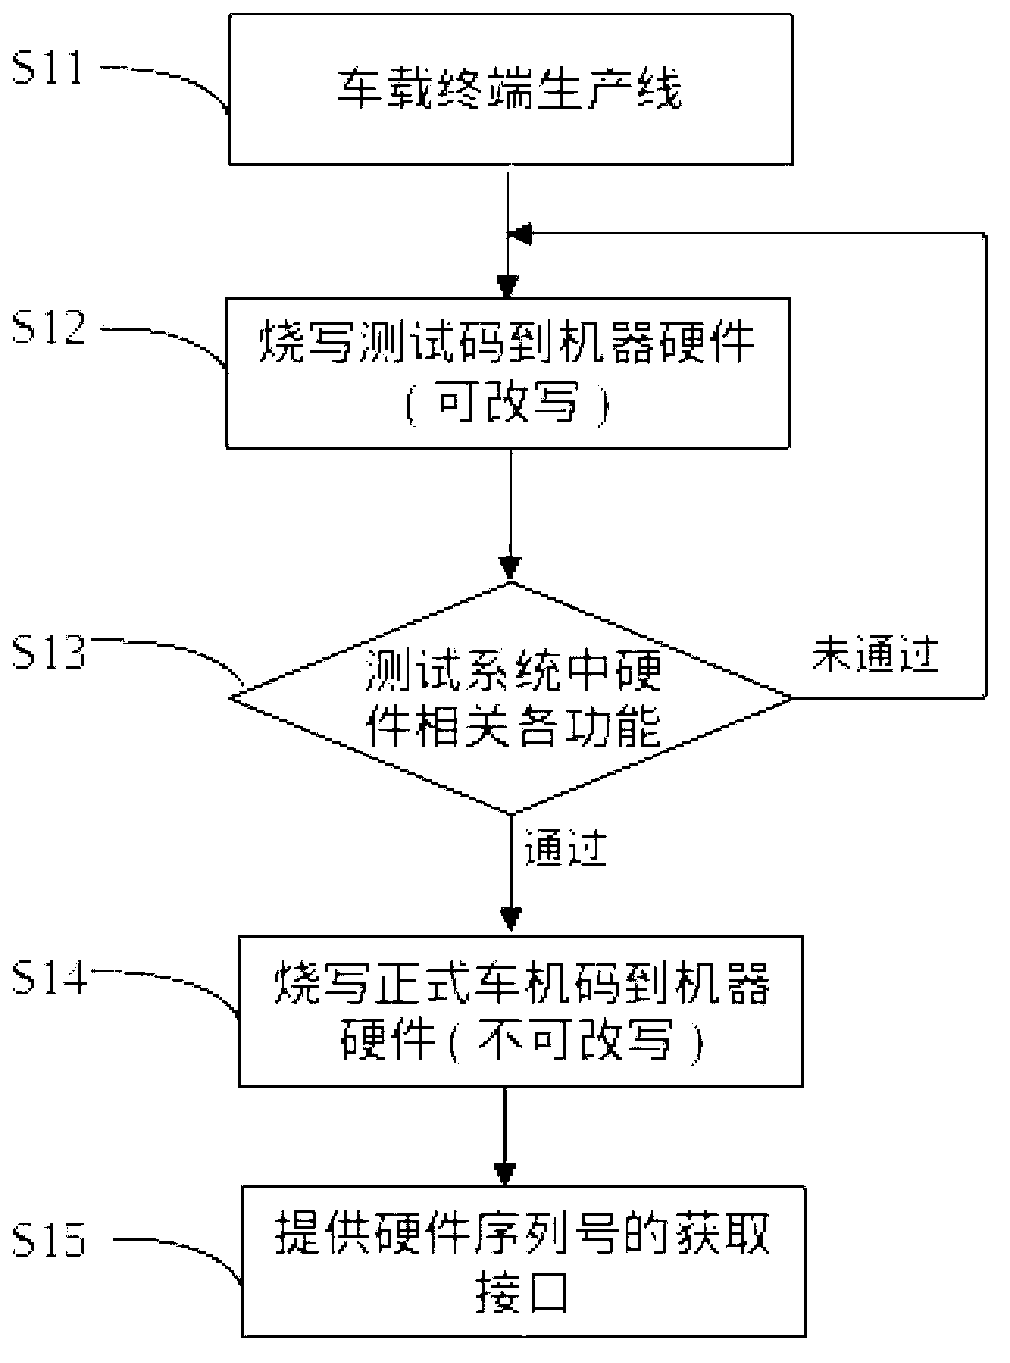 Vehicle-mounted terminal identity recognition method